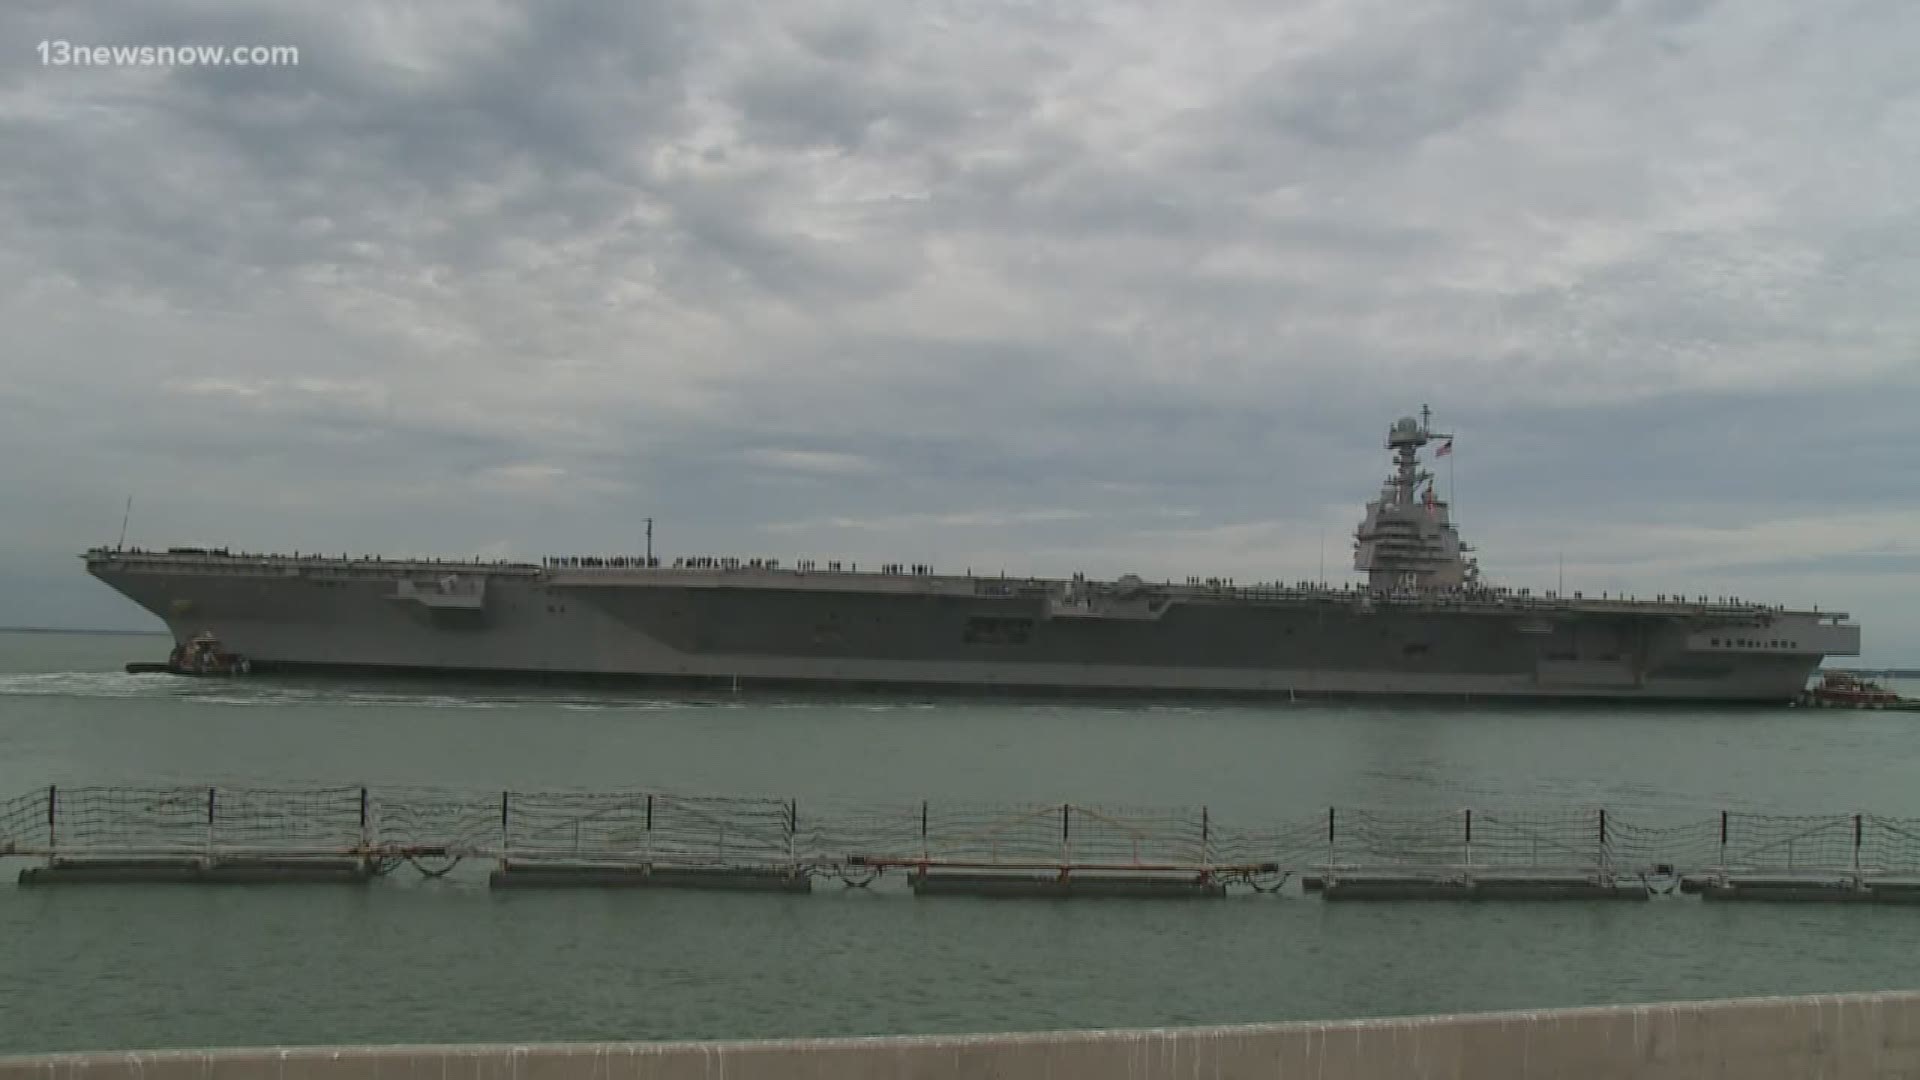 After taking to the sea for more trials, the USS Gerald R. Ford has returned to Naval Station Norfolk. It's spent more than a year undergoing upgrades and repairs.